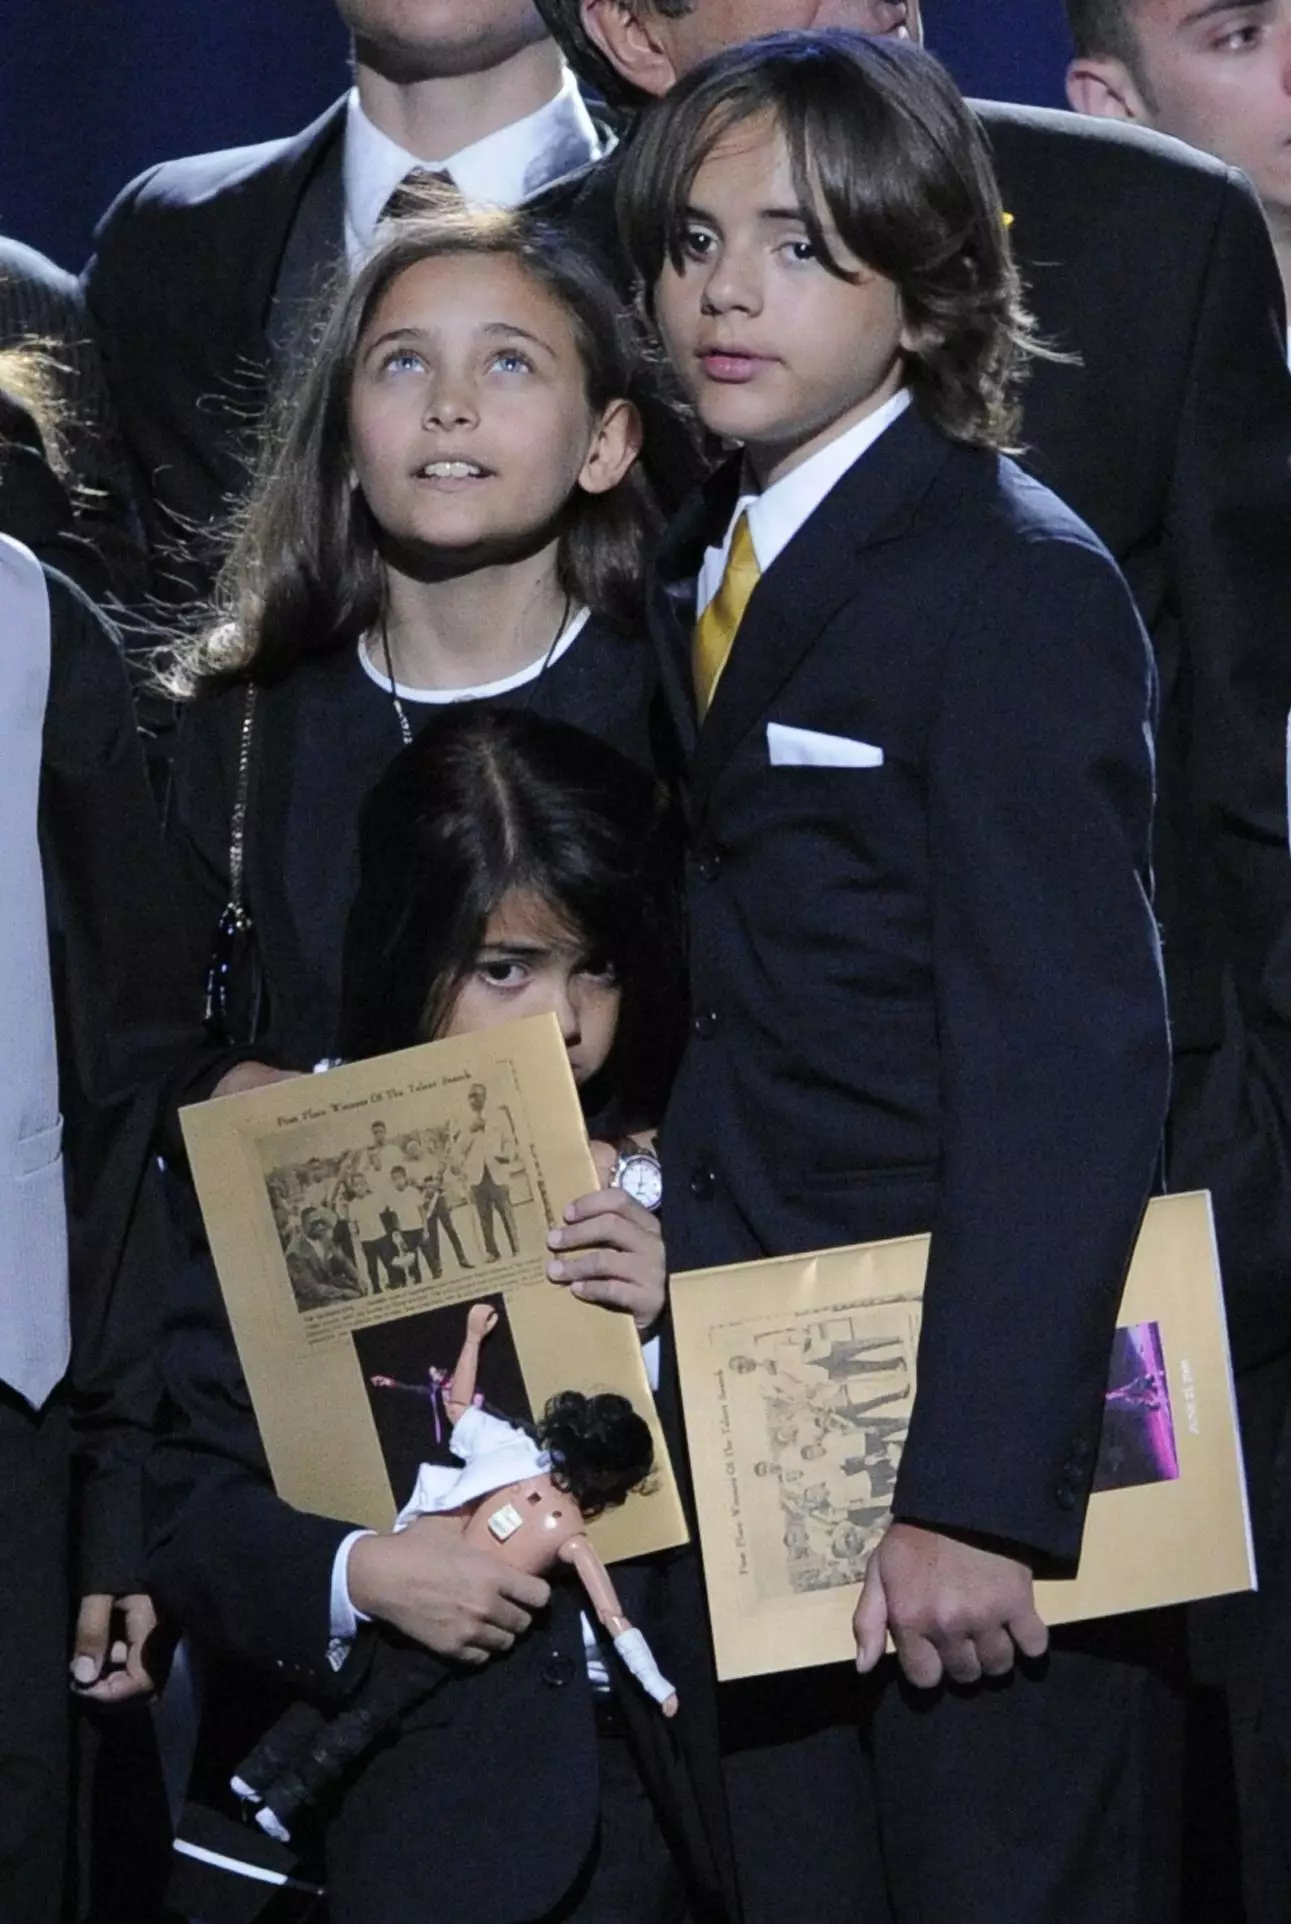 Paris with her brothers during a memorial service for Michael Jackson.